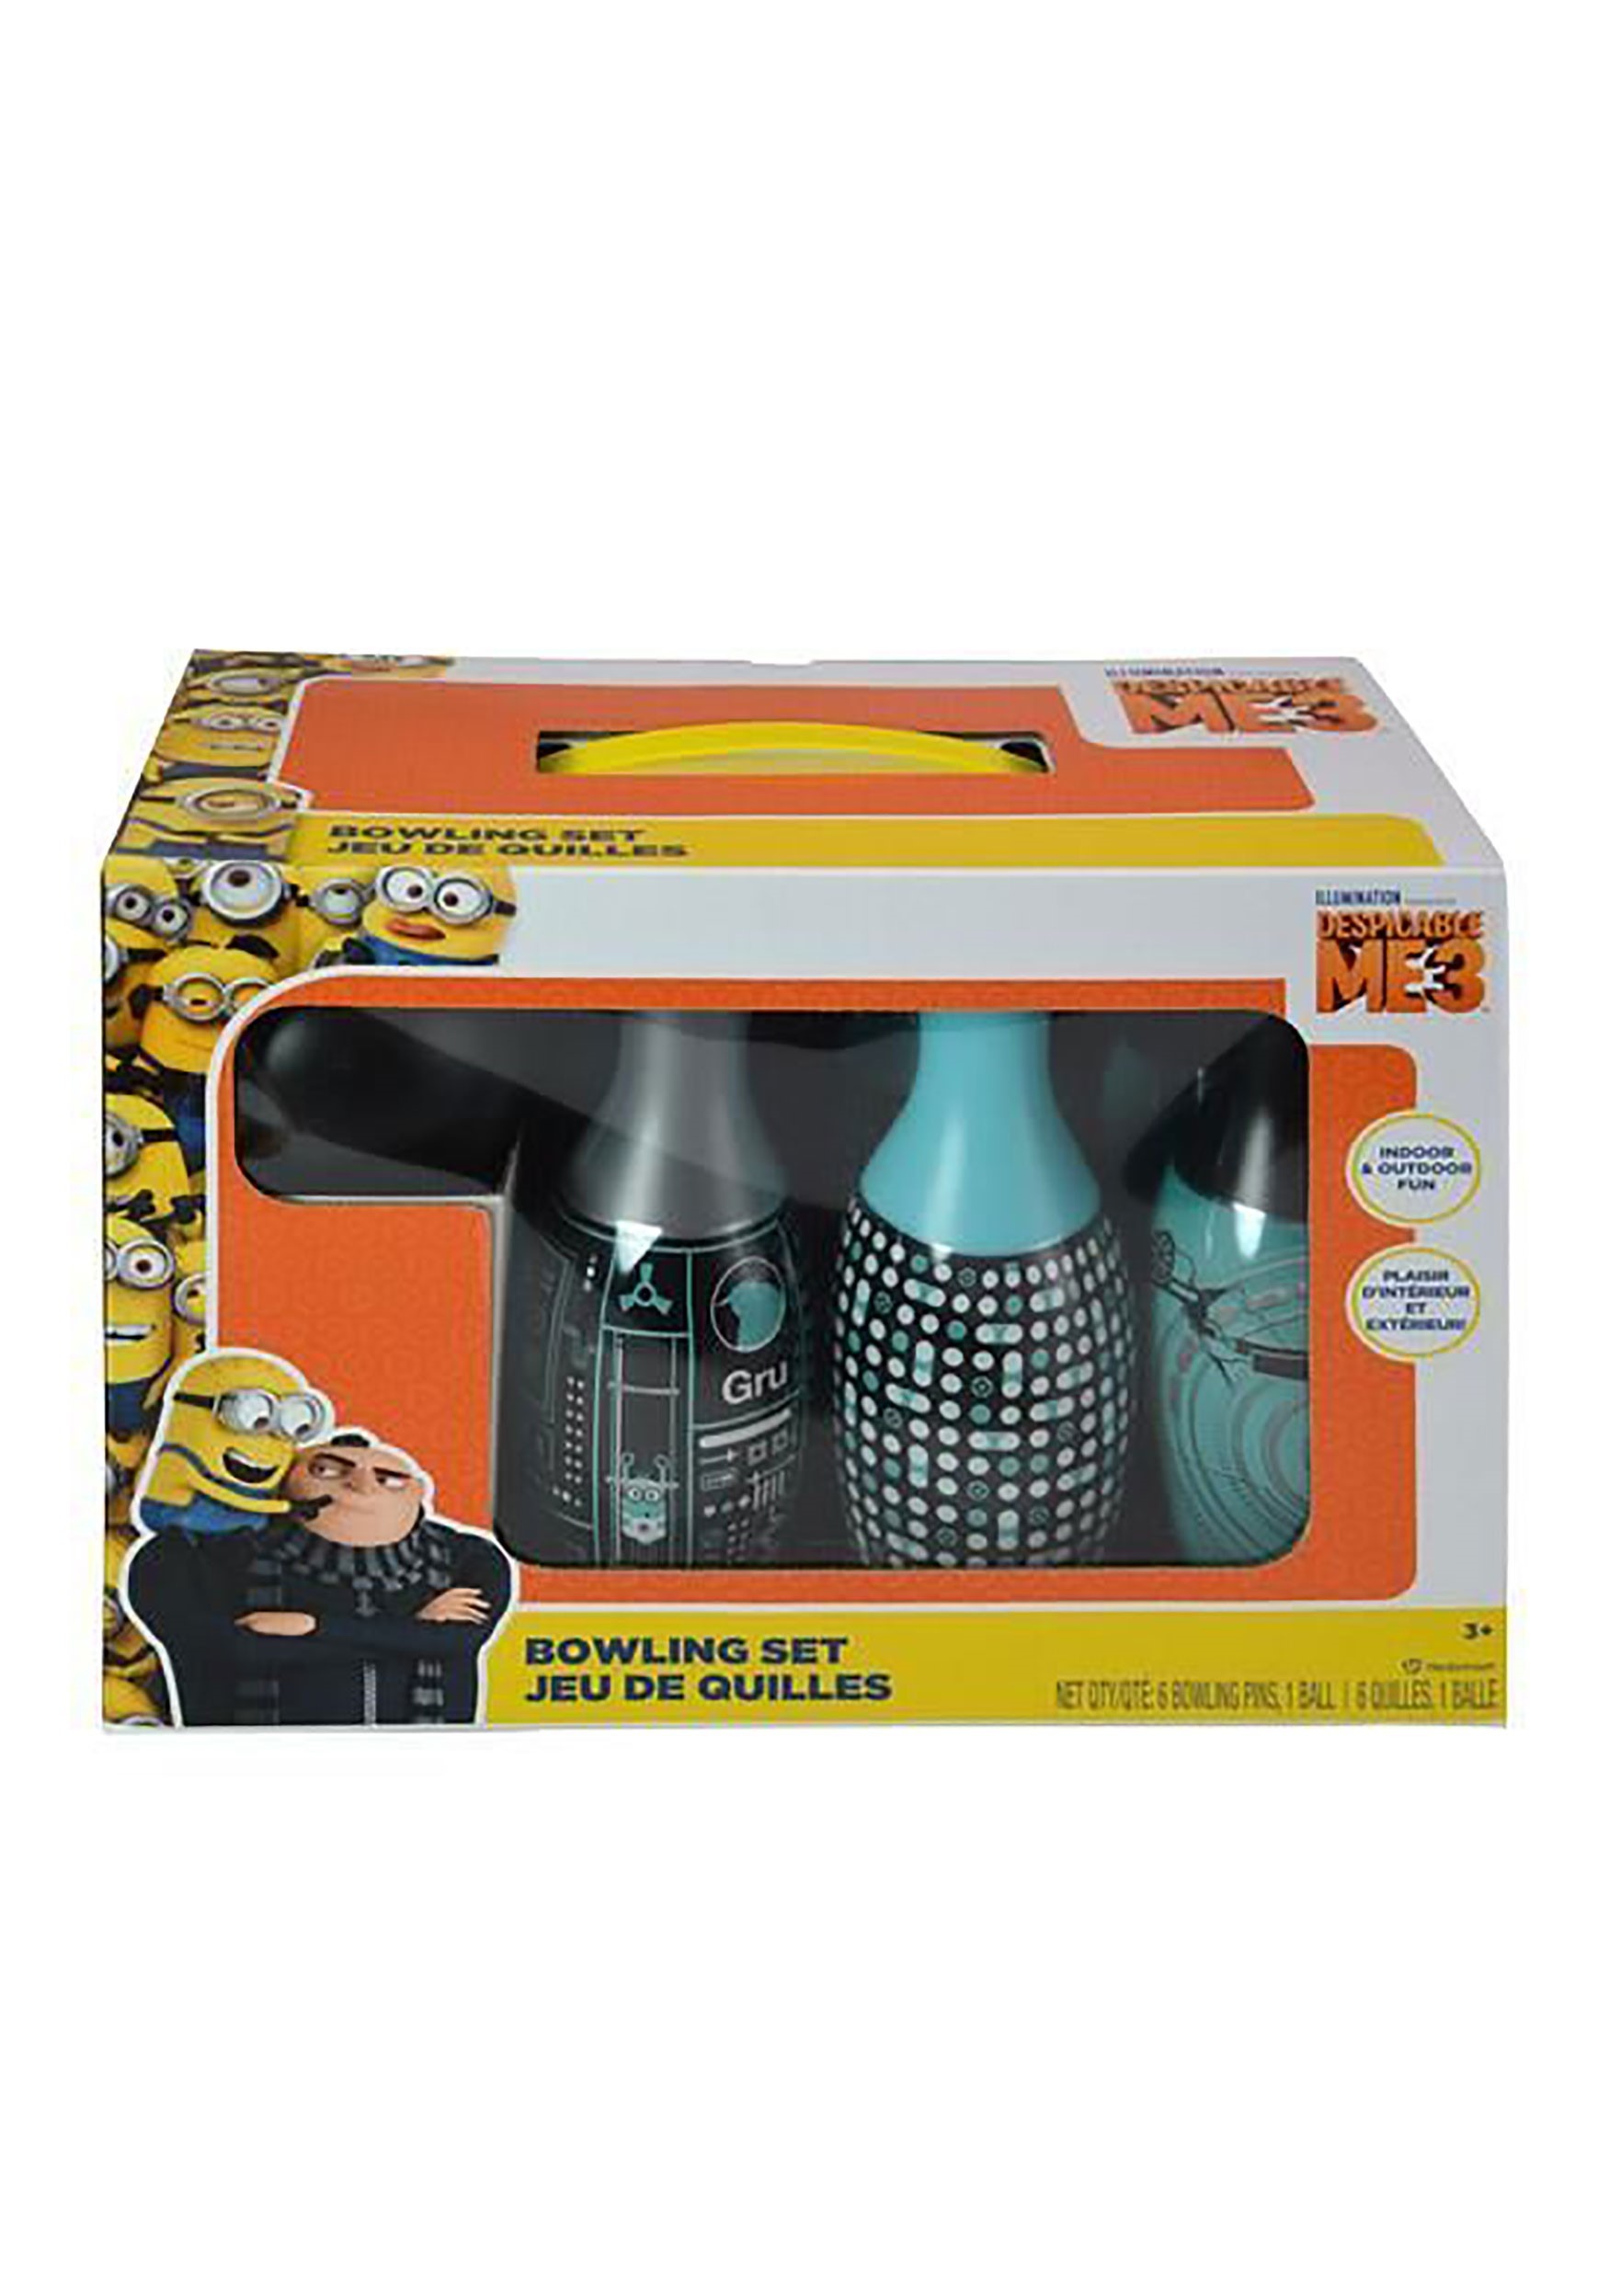 Despicable Me 3 Bowling Set Game